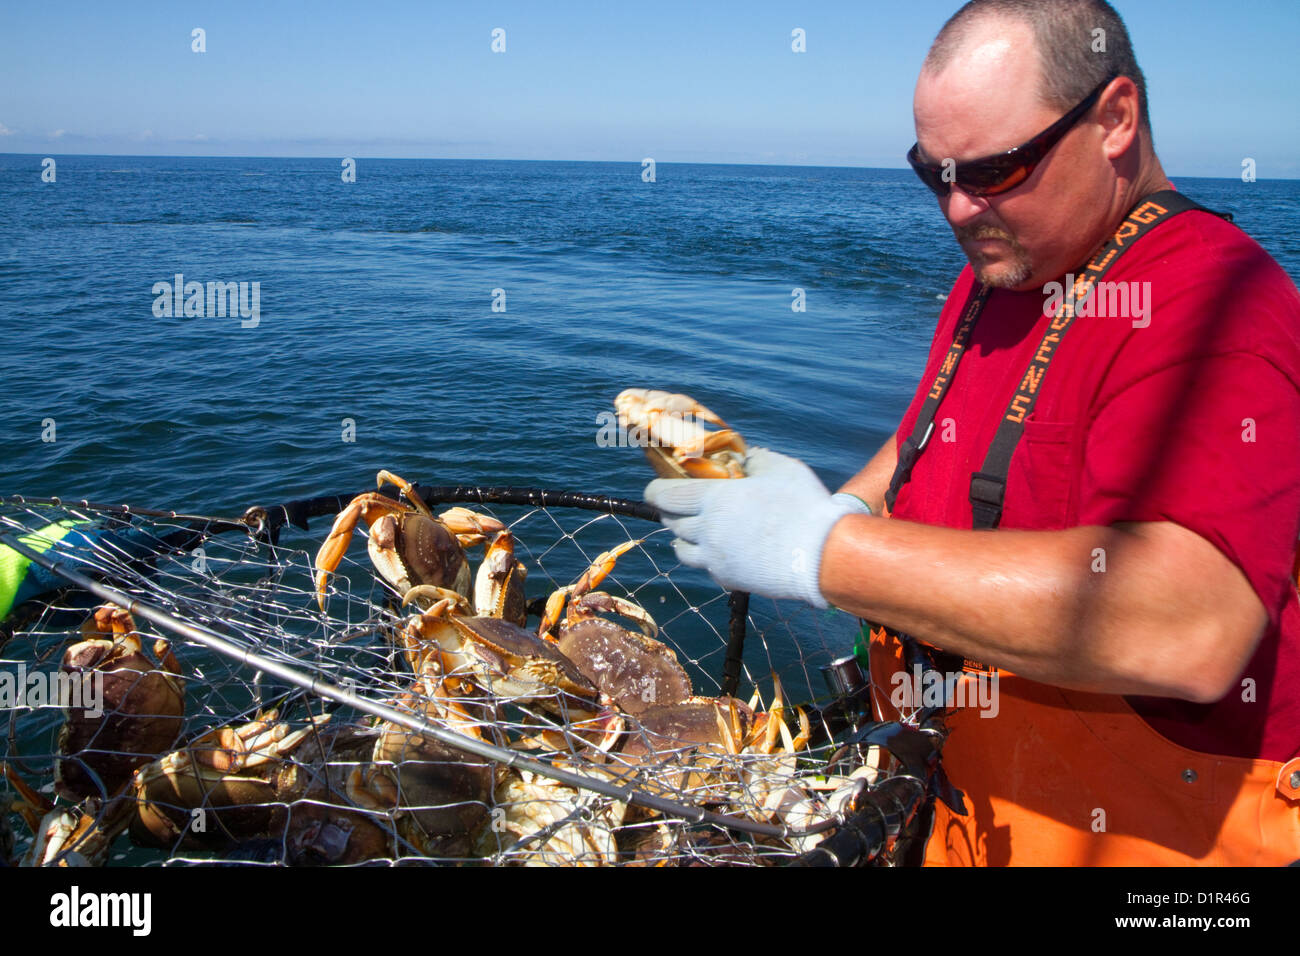 https://c8.alamy.com/comp/D1R46G/crab-fishing-in-the-pacific-ocean-off-the-coast-of-depoe-bay-oregon-D1R46G.jpg